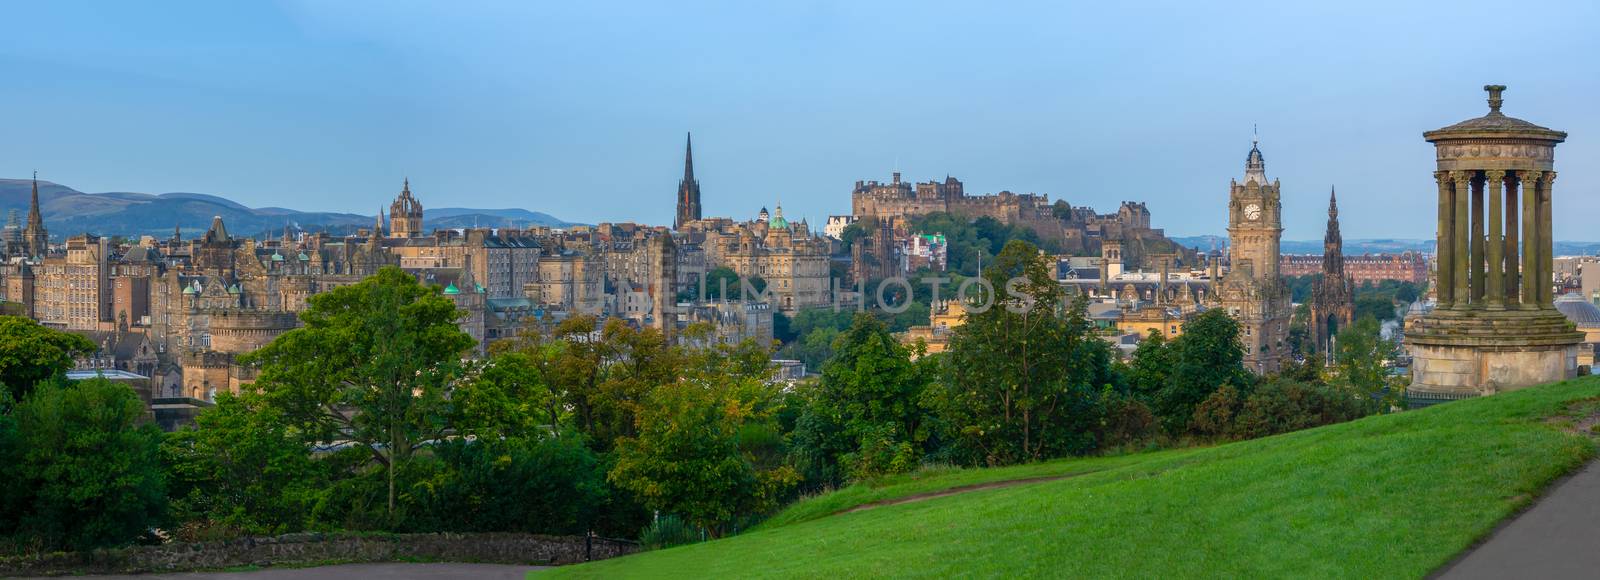 Panorama Of The Beautiful Old Town Of Edinburgh, Including the Castle, As Taken From Calton Hill In Soft Morning Light